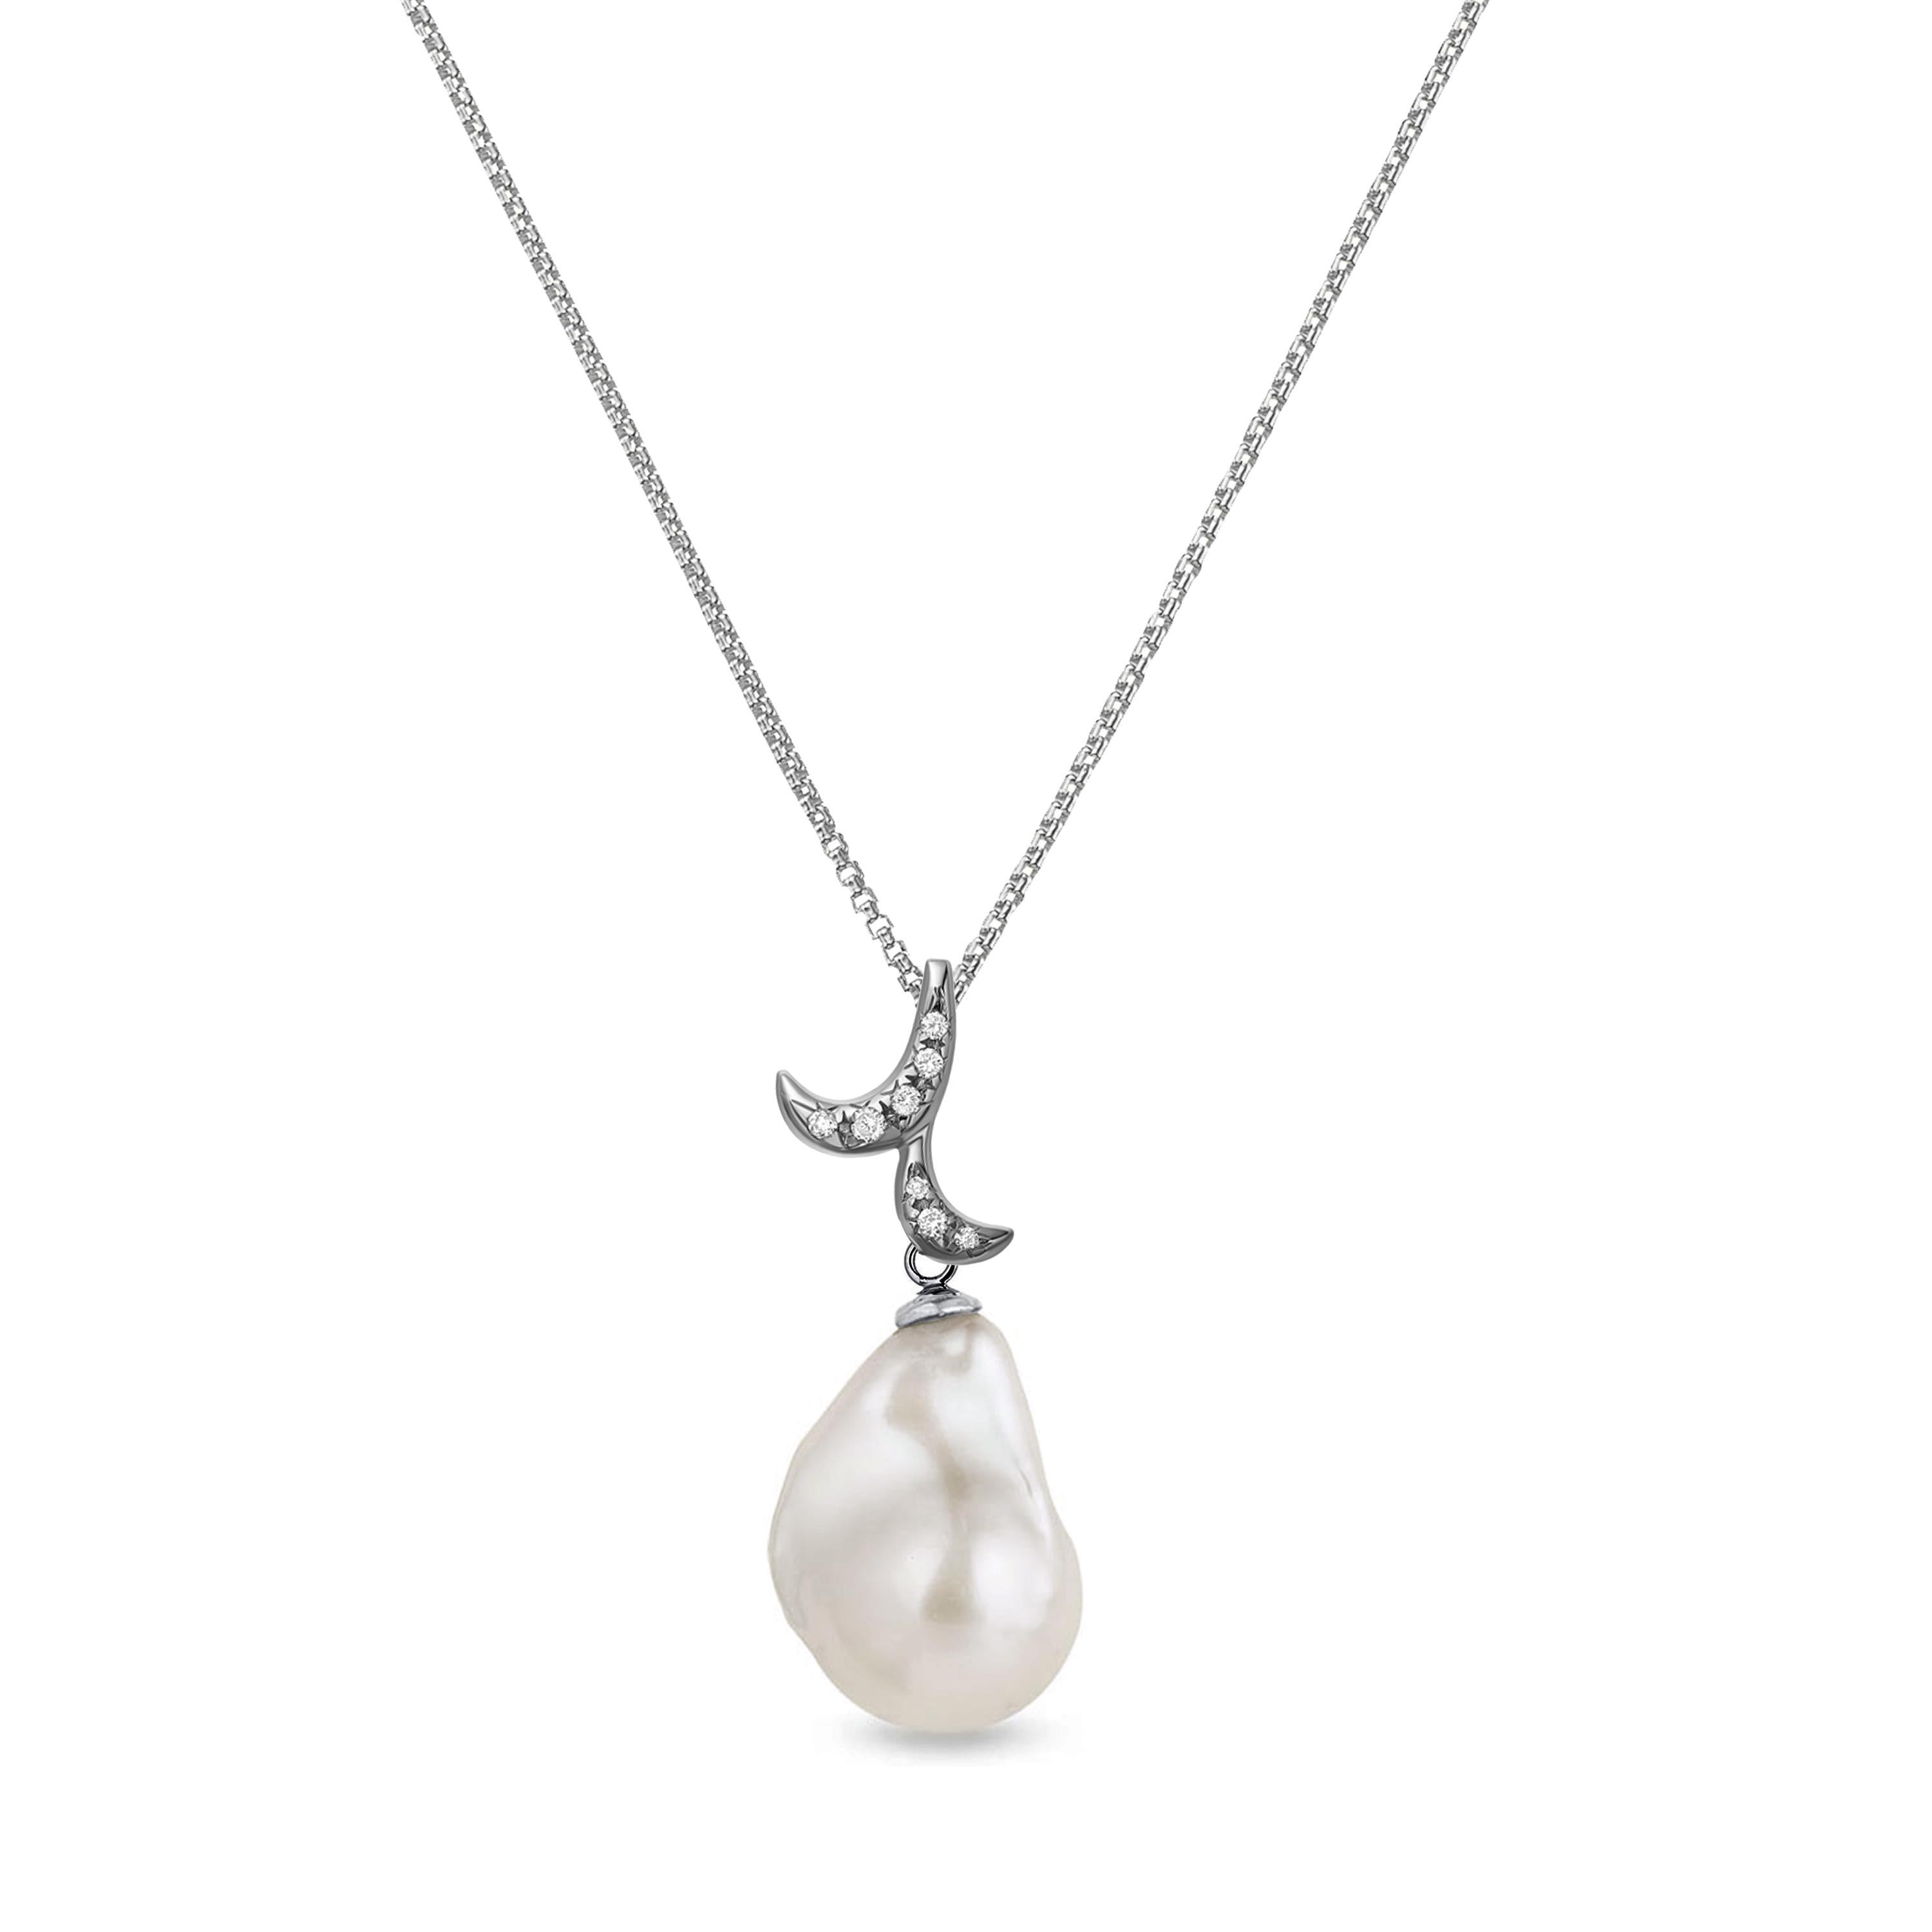 Description:
Whispering baroque pearl pendant with 0.03ct white diamonds and a 12mm x 14mm baroque pearl, set in black rhodium plate on 18ct white gold.
- Size (LxW): 28mm x 10mm
- Weight: 4.2gm
- Stones: diamonds total weight = 0.03ct, baroque